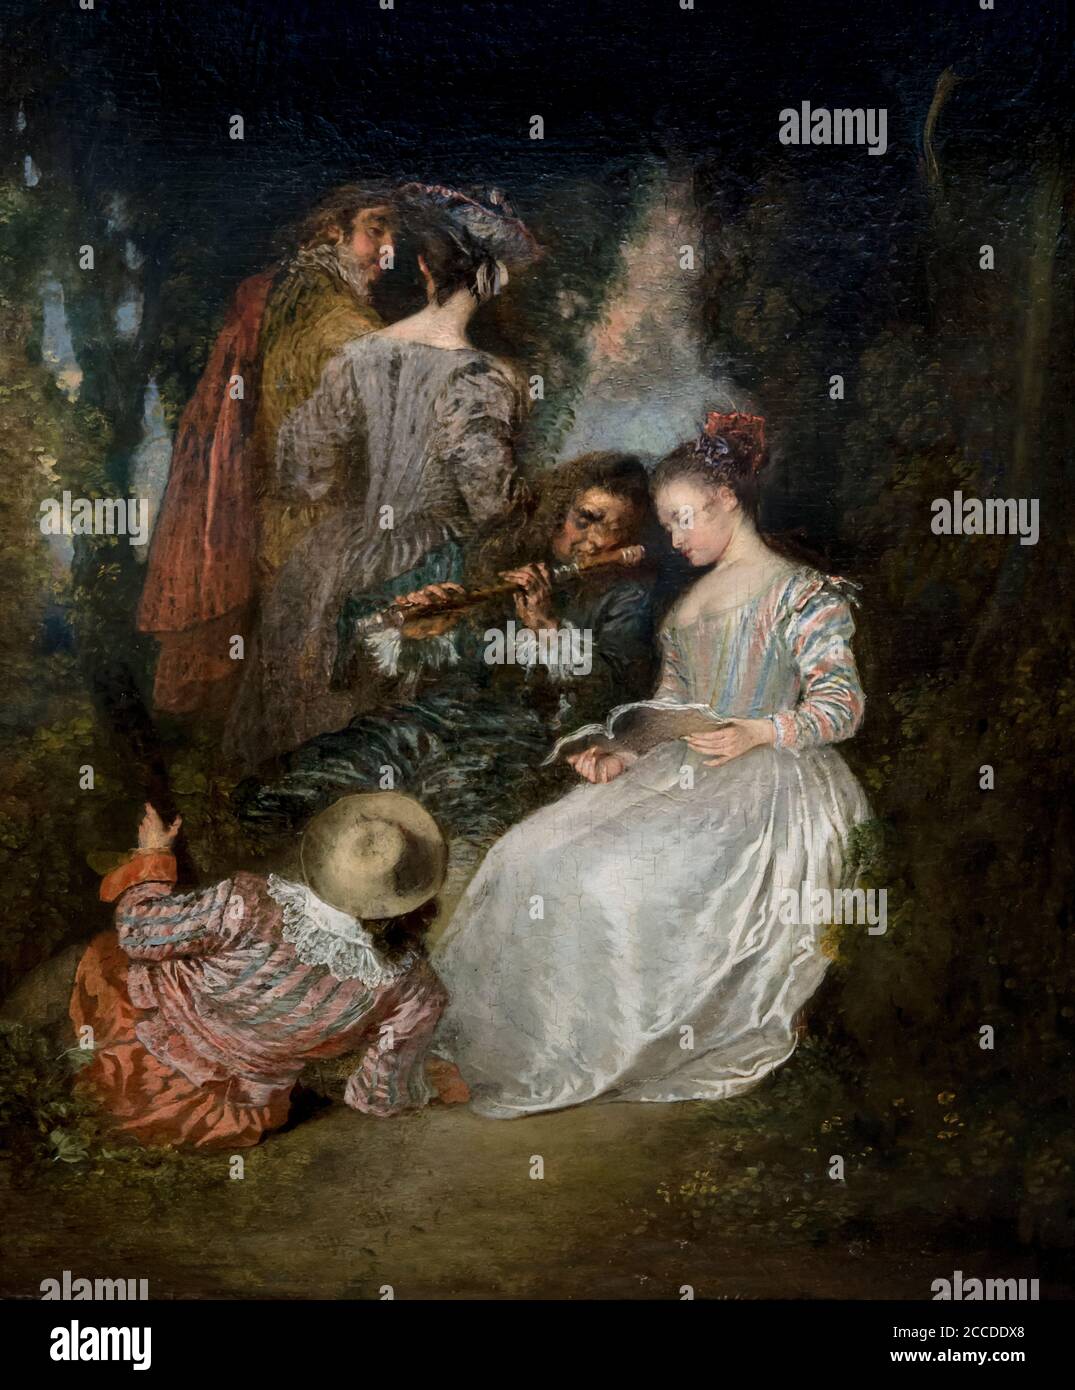 The Perfect Accord, Perfect Harmony, Antoine Watteau, 1719, Los Angeles County Museum of Art, Los Angeles, California, USA, Nord America Foto Stock